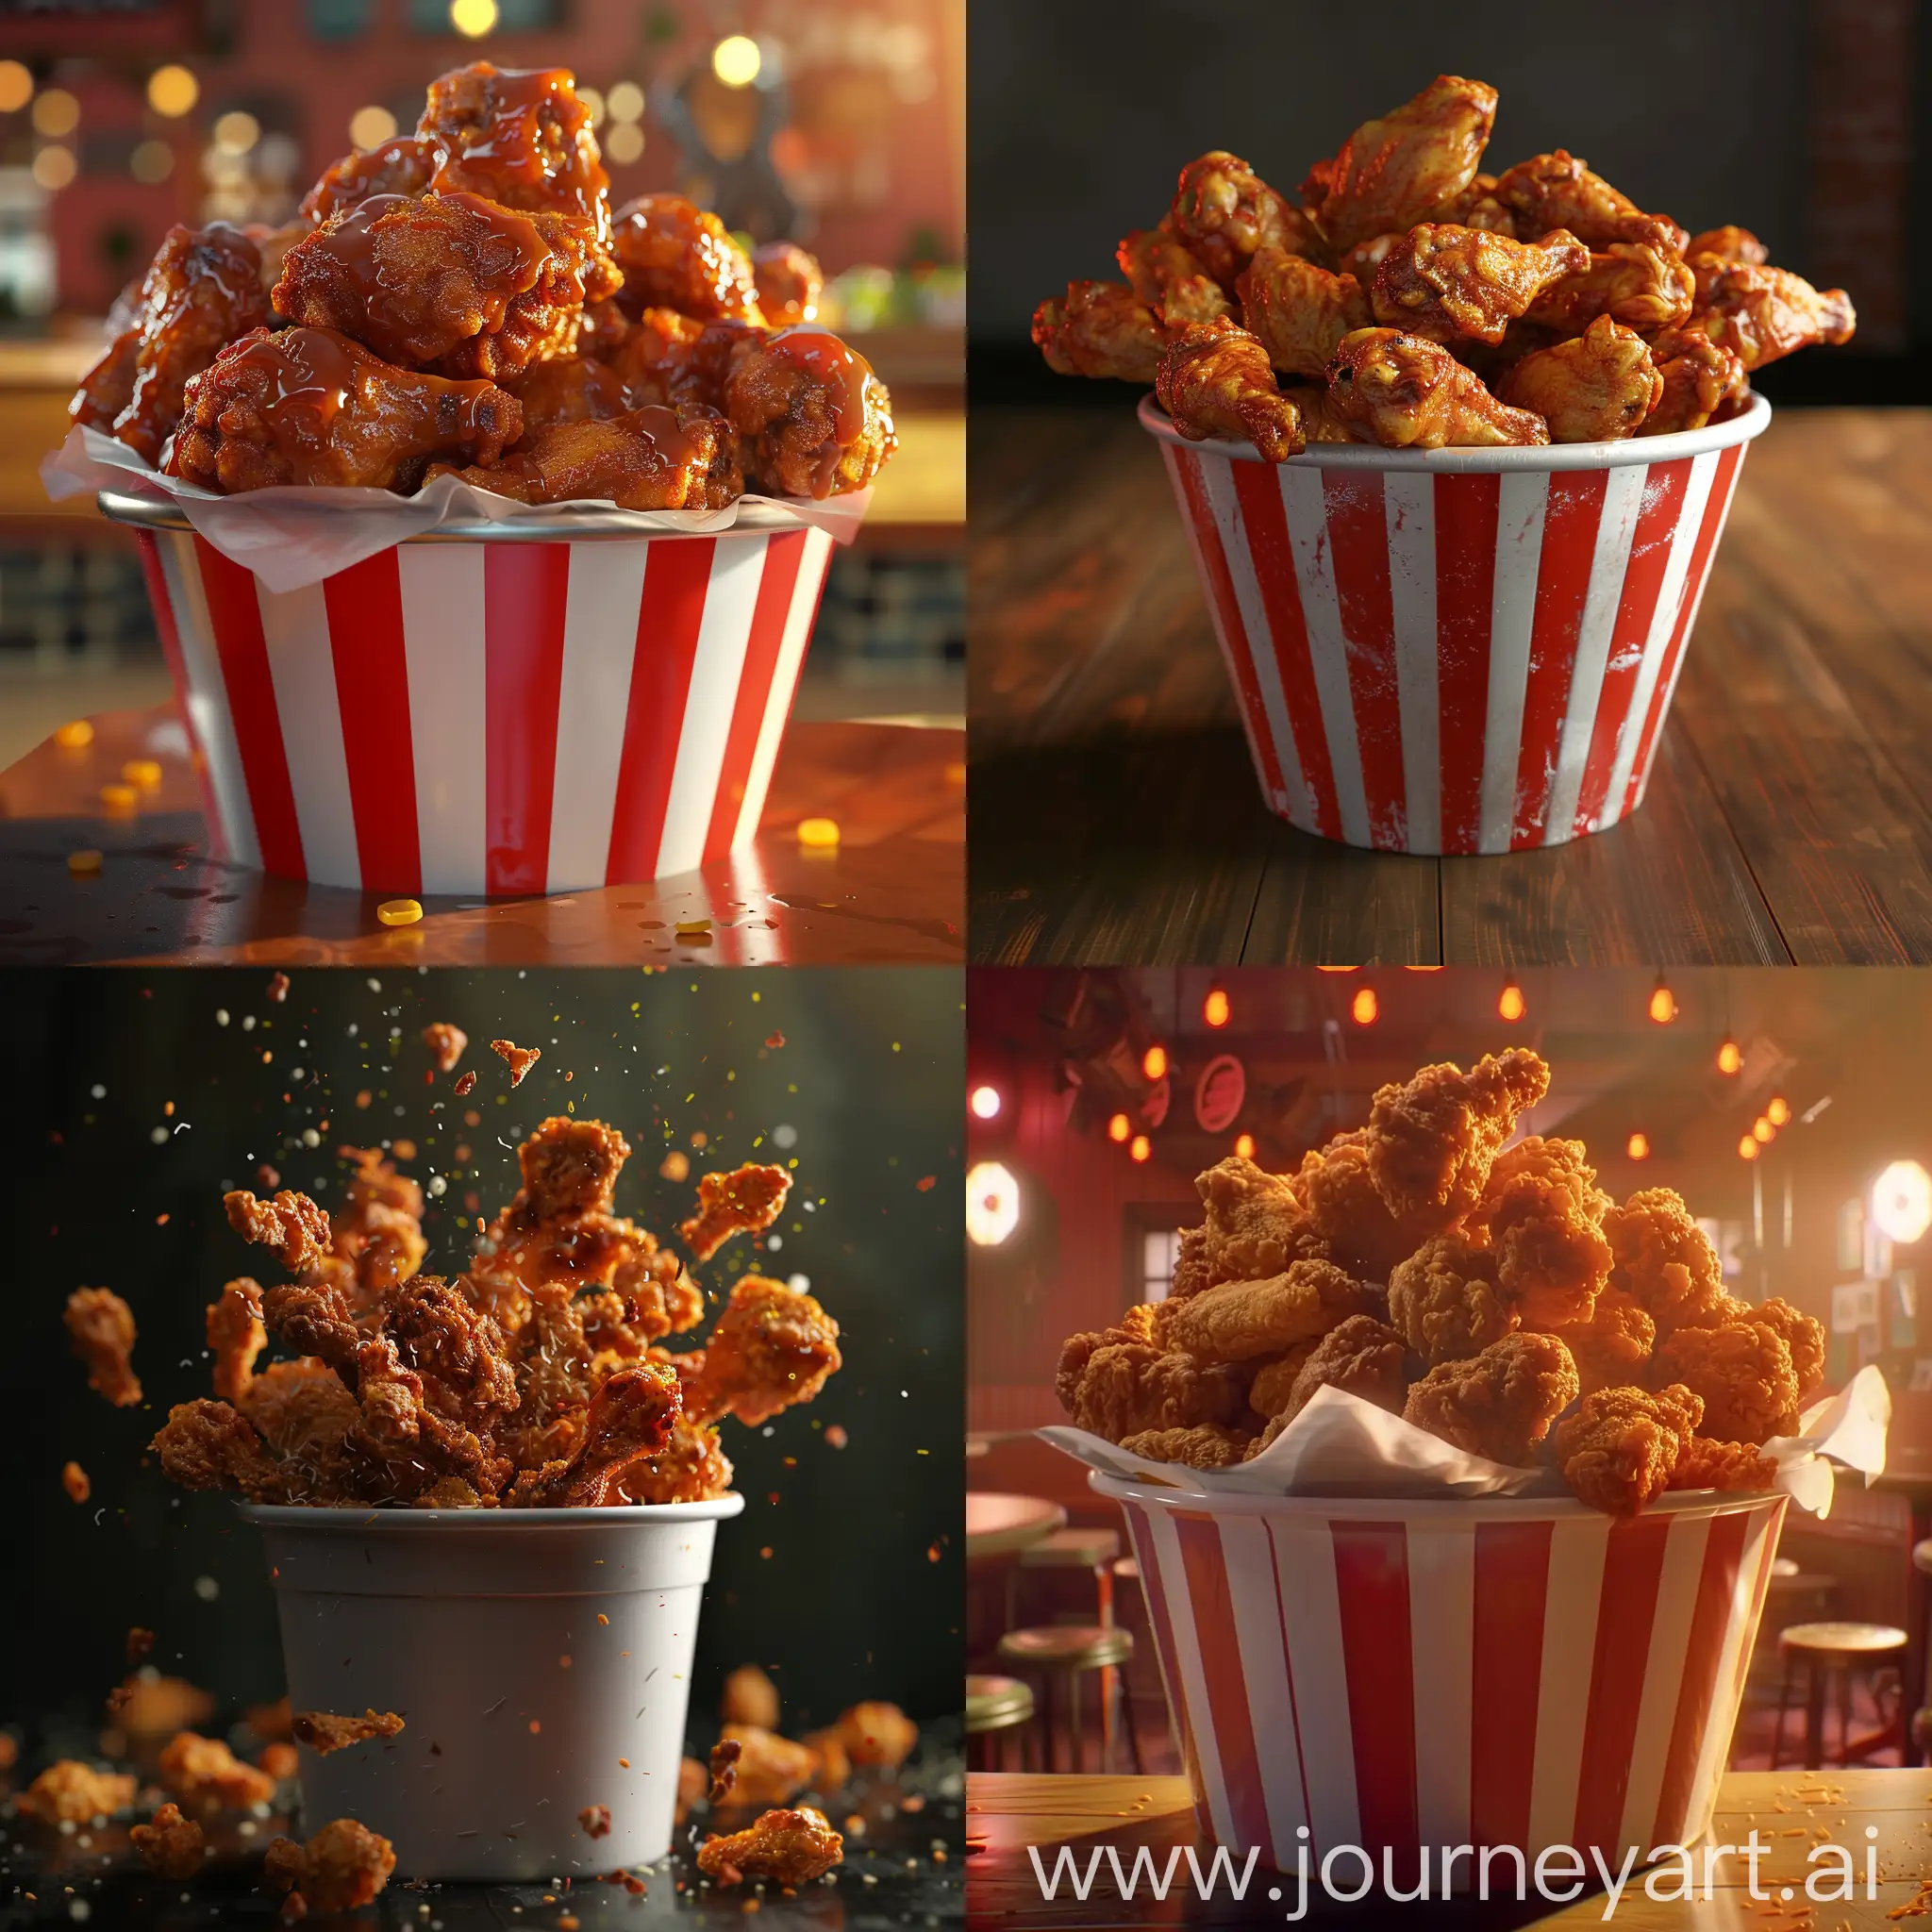 Delicious-Heap-of-Golden-Fried-Chicken-Wings-3D-Animation